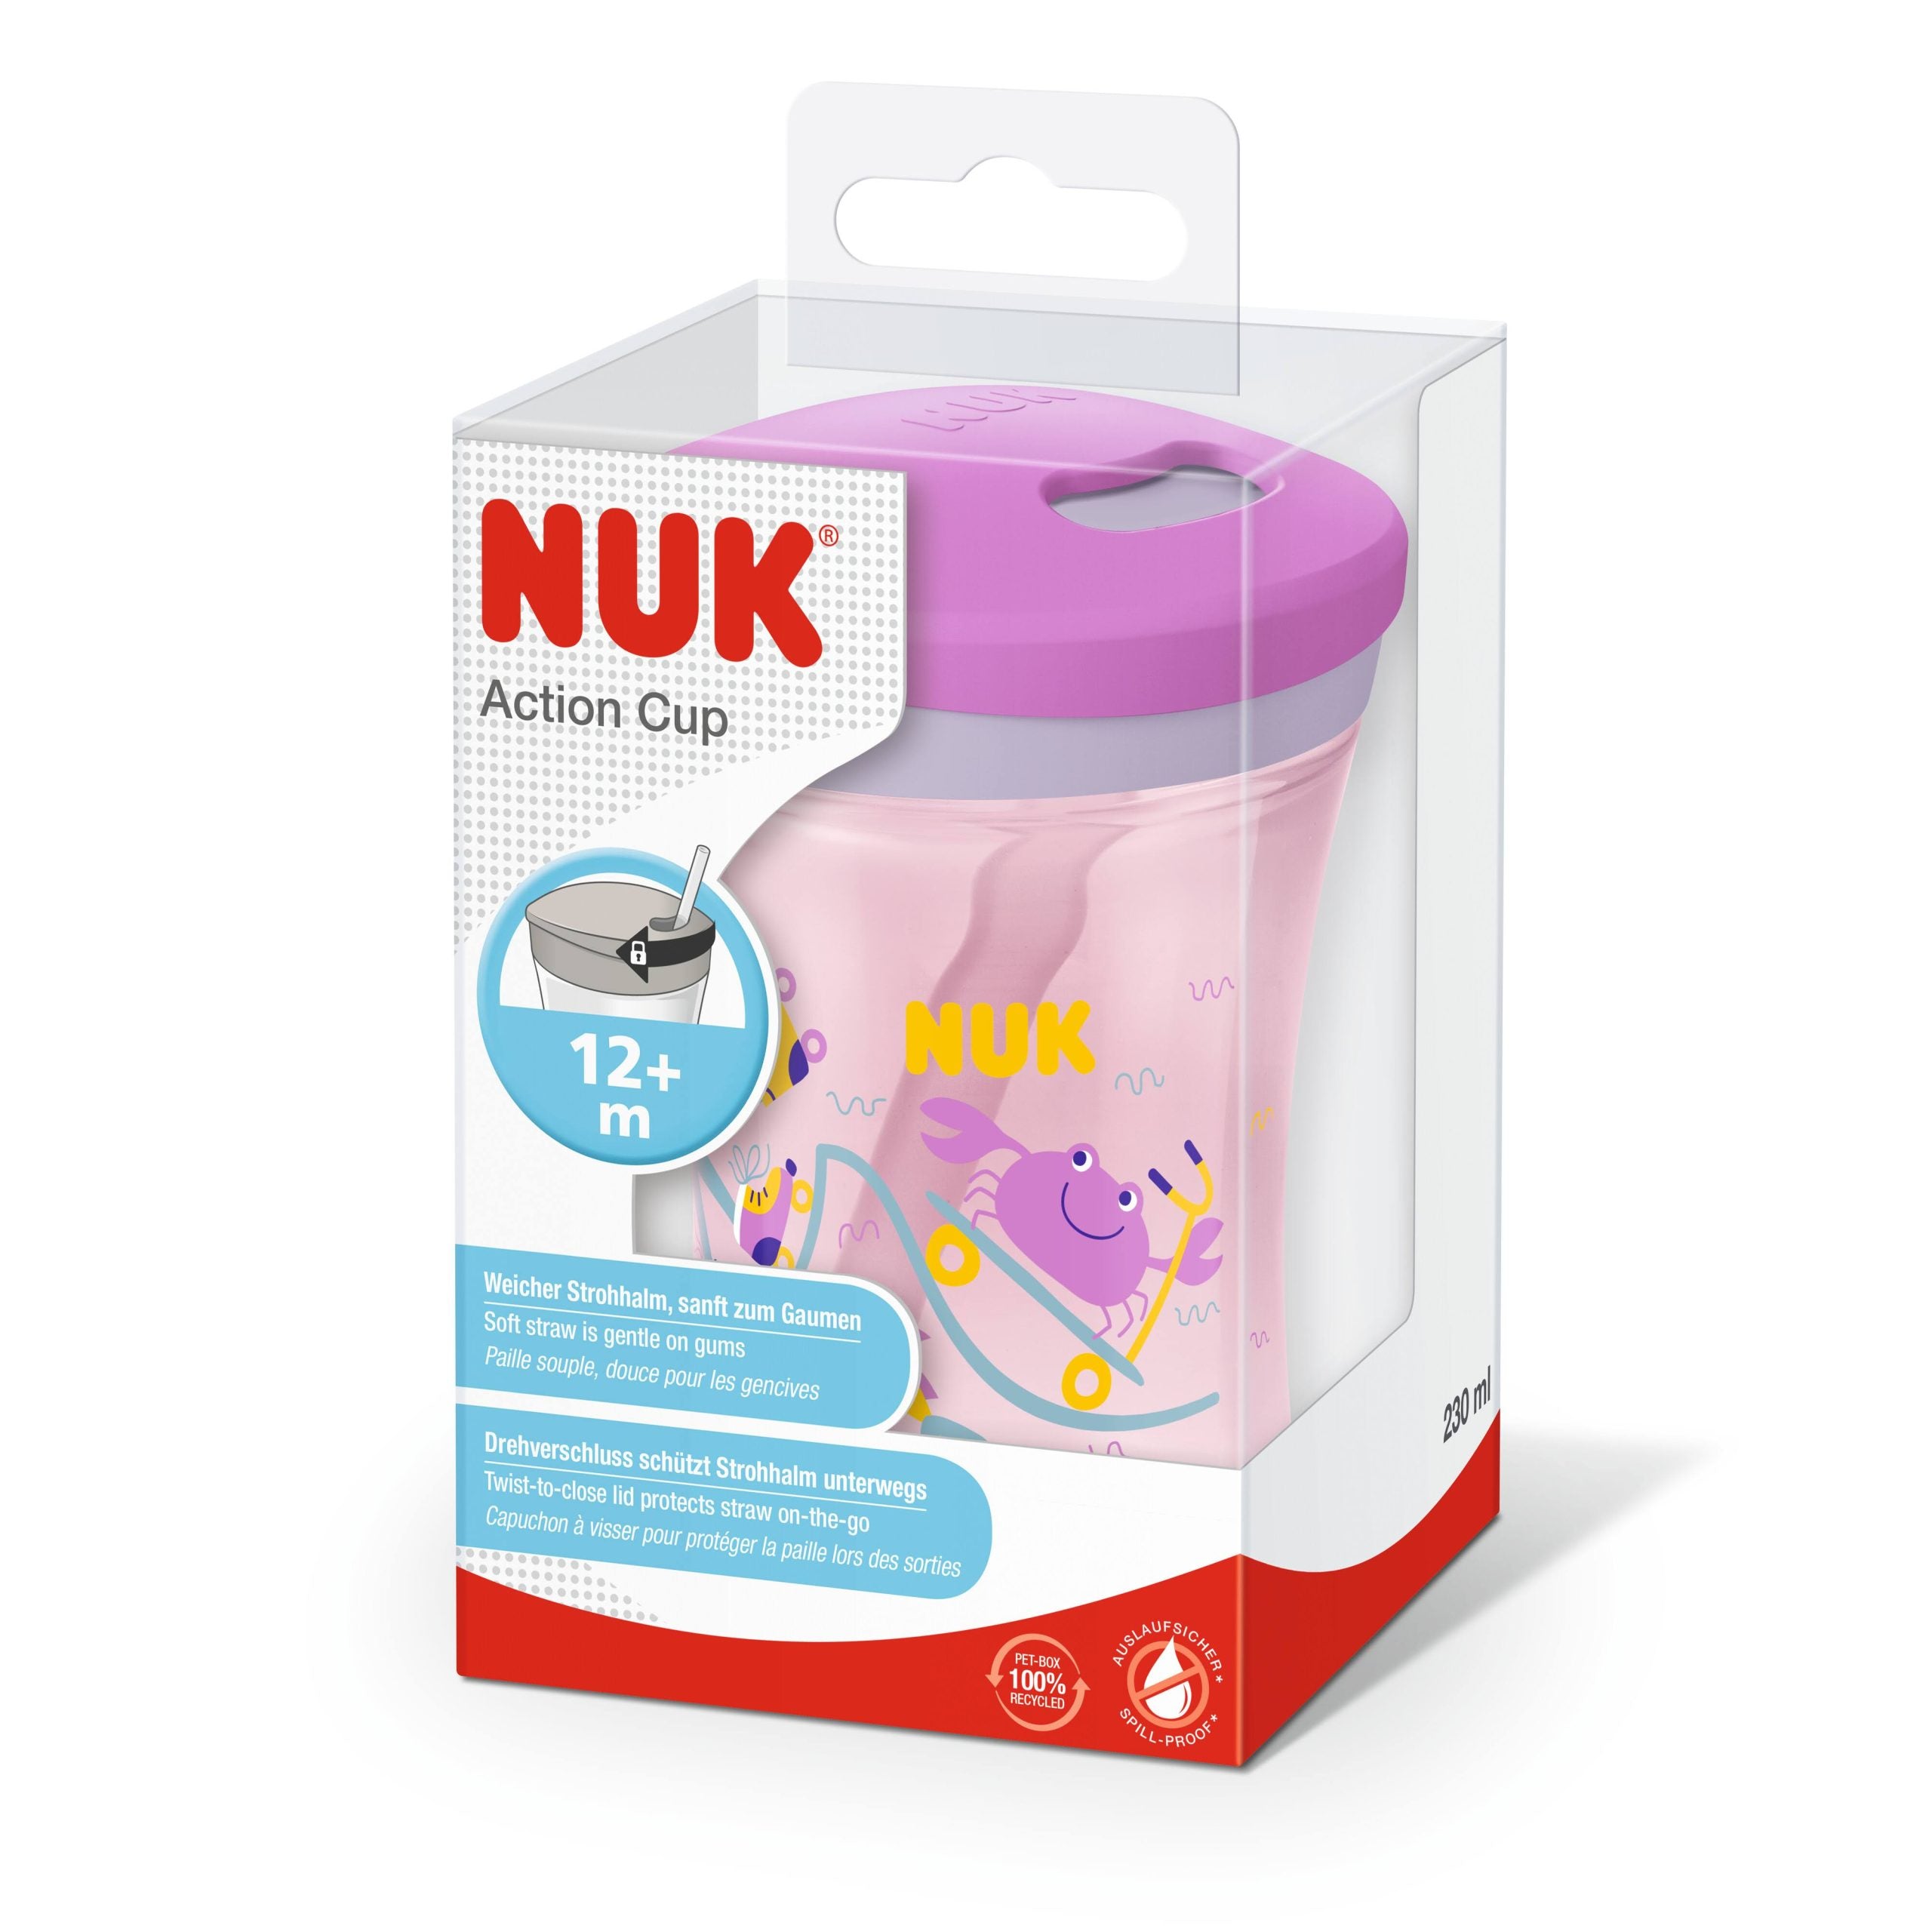 Nuk Action Cup For 12 Months + Online in Pakistan - Lahore Karachi Islamabad - Pink